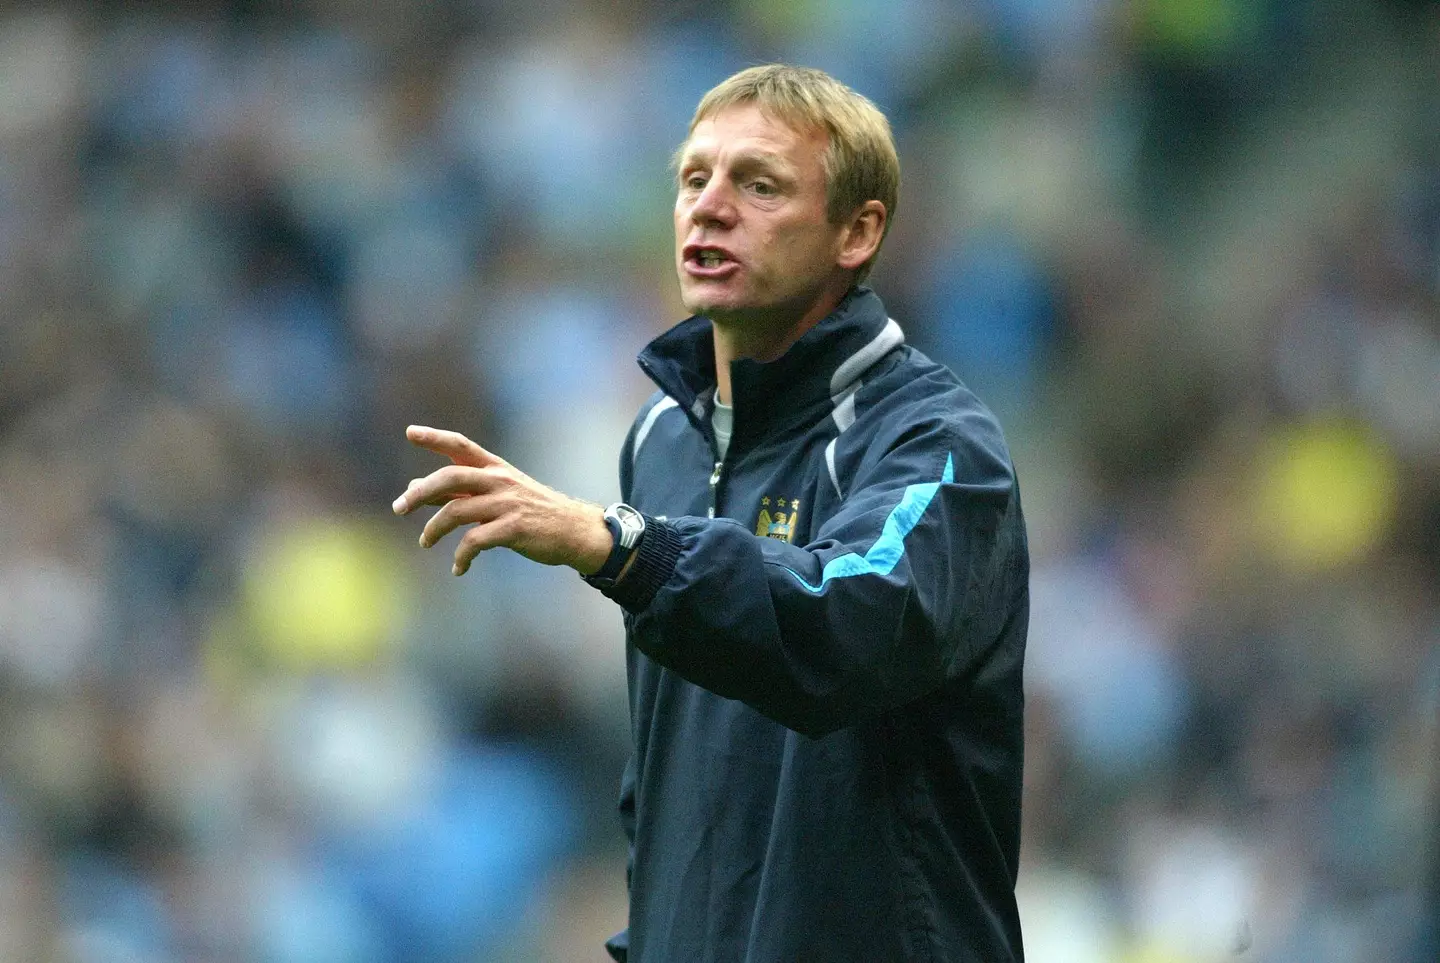 City were managed by former England international Stuart Pearce at the time (Image: Alamy)